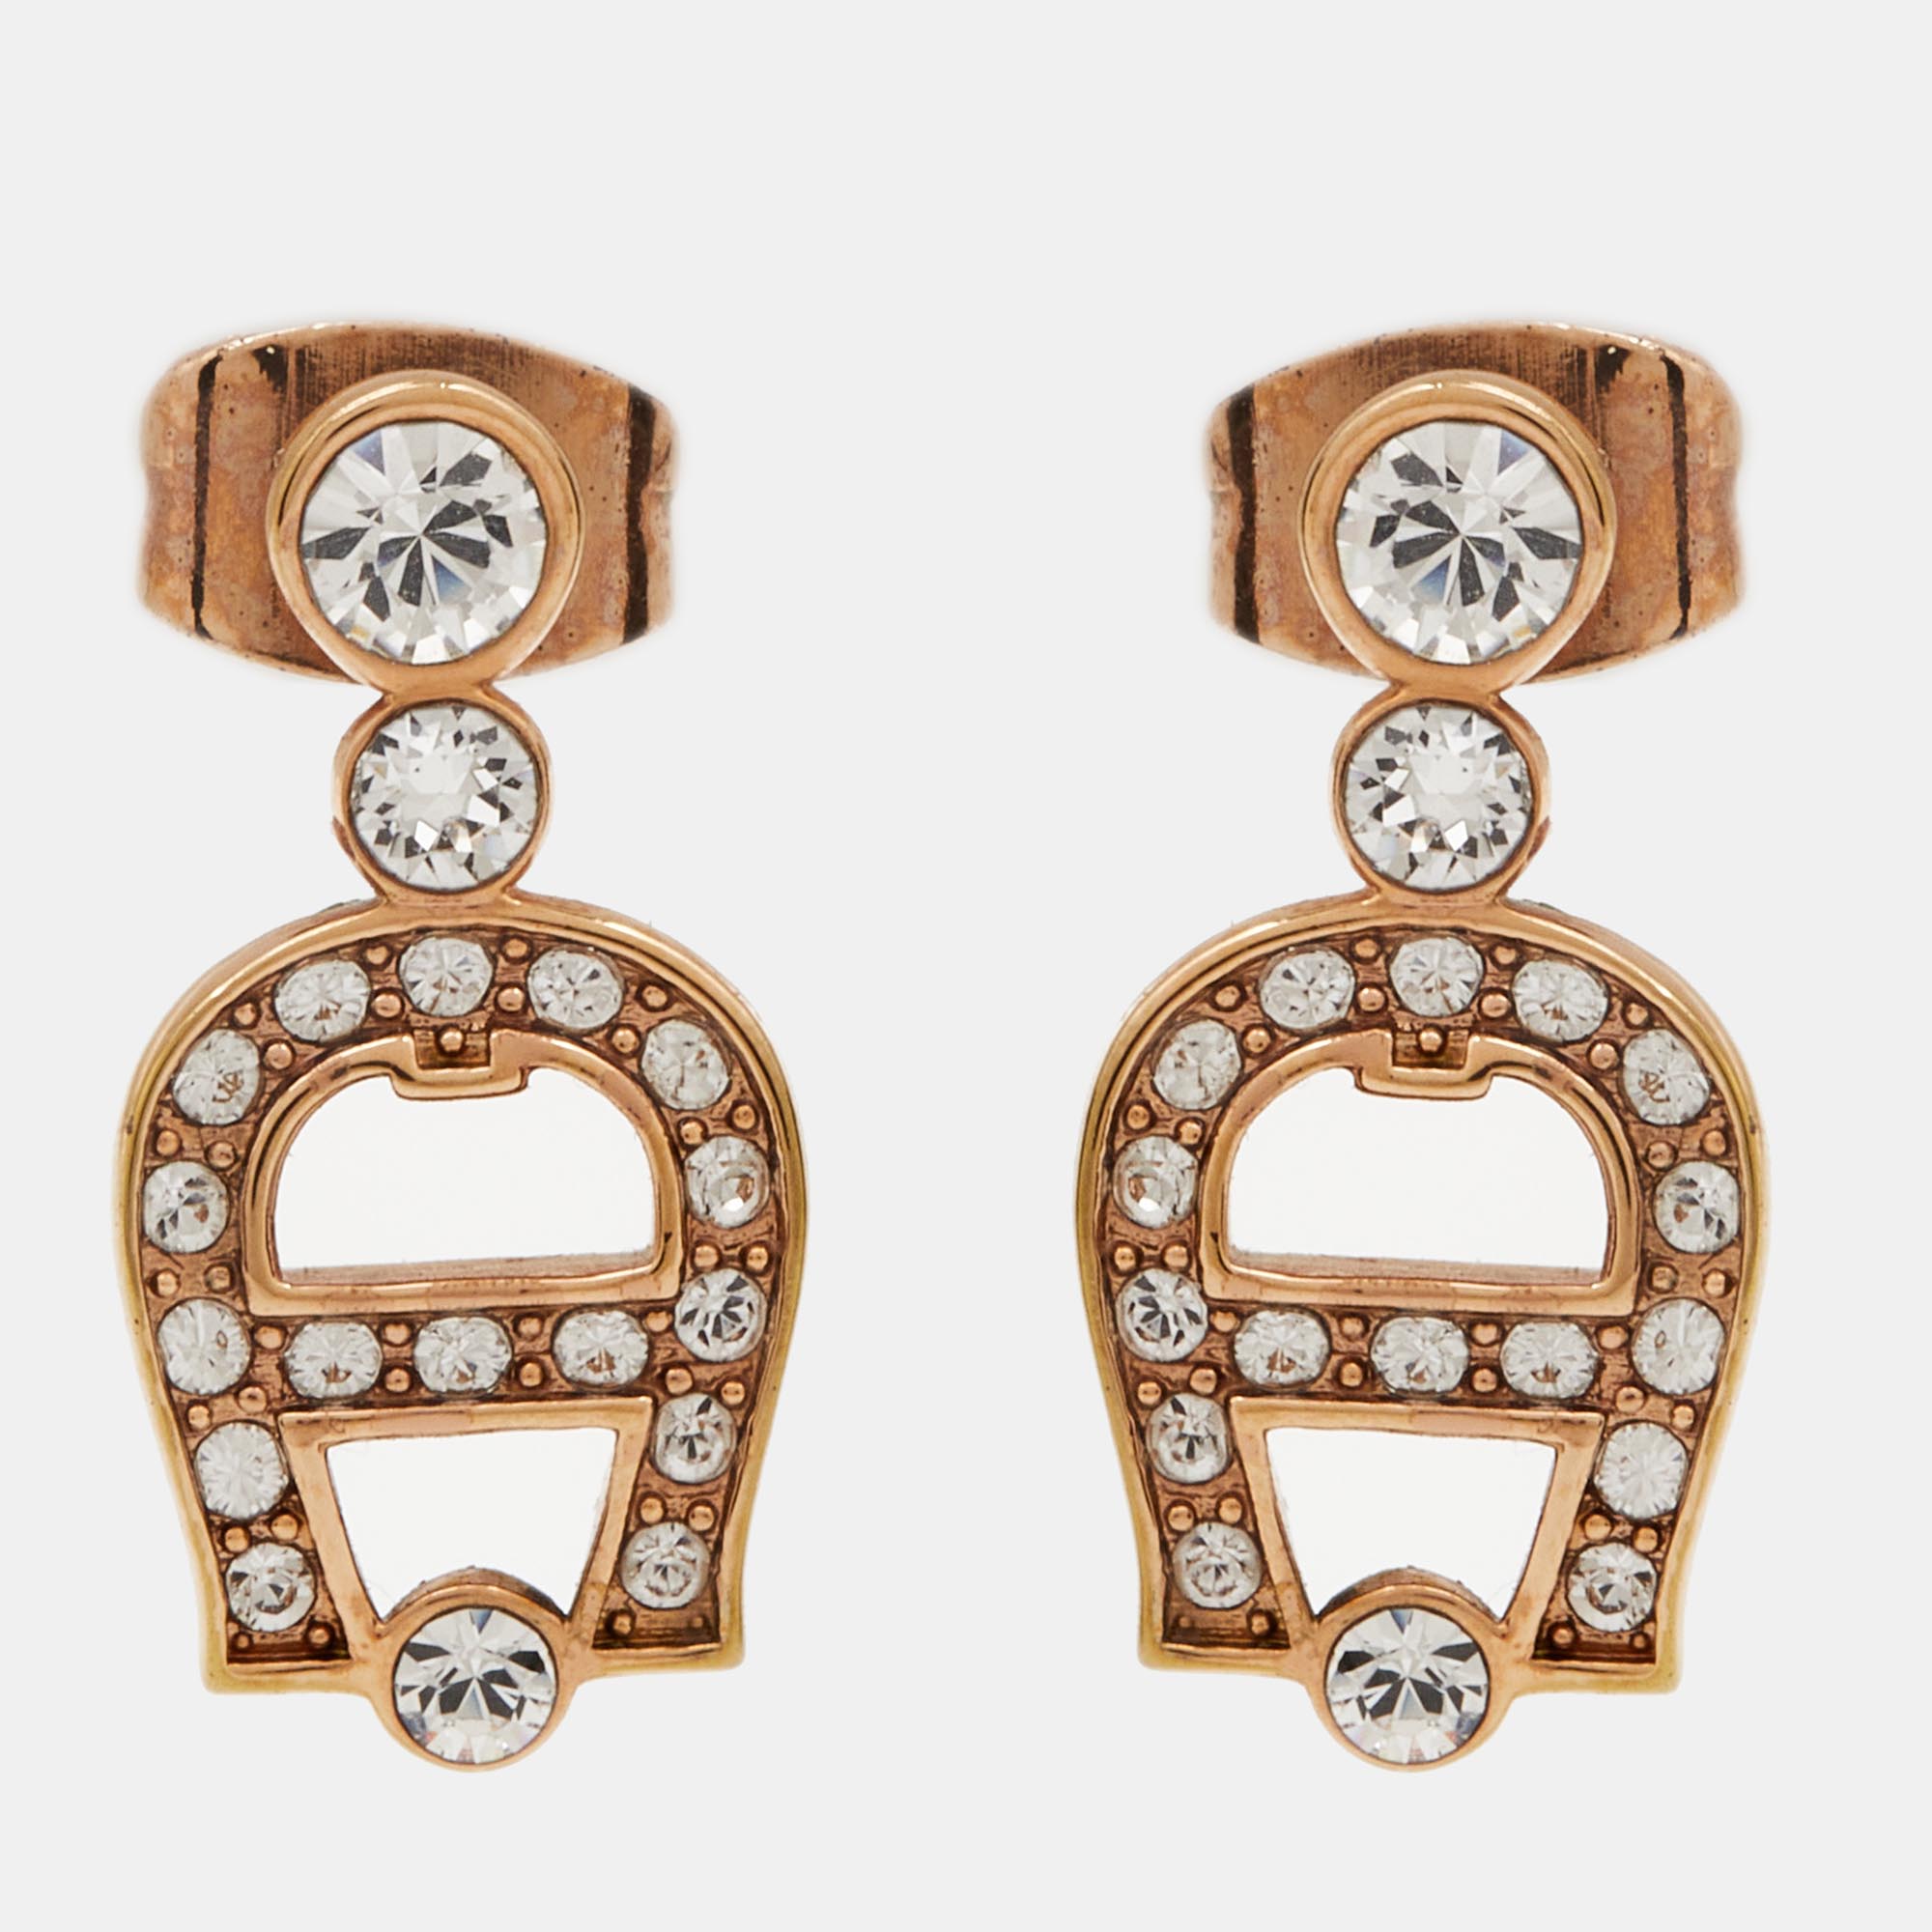 Be it day or night these amazing earrings will make you shine no matter what the occasion is. Coming from the house of Aigner this pair is designed in a drop style with a gold tone body featuring the signature A motifs decorated with faux pearls. Wear with a simple blouse or dress to glorify the look.